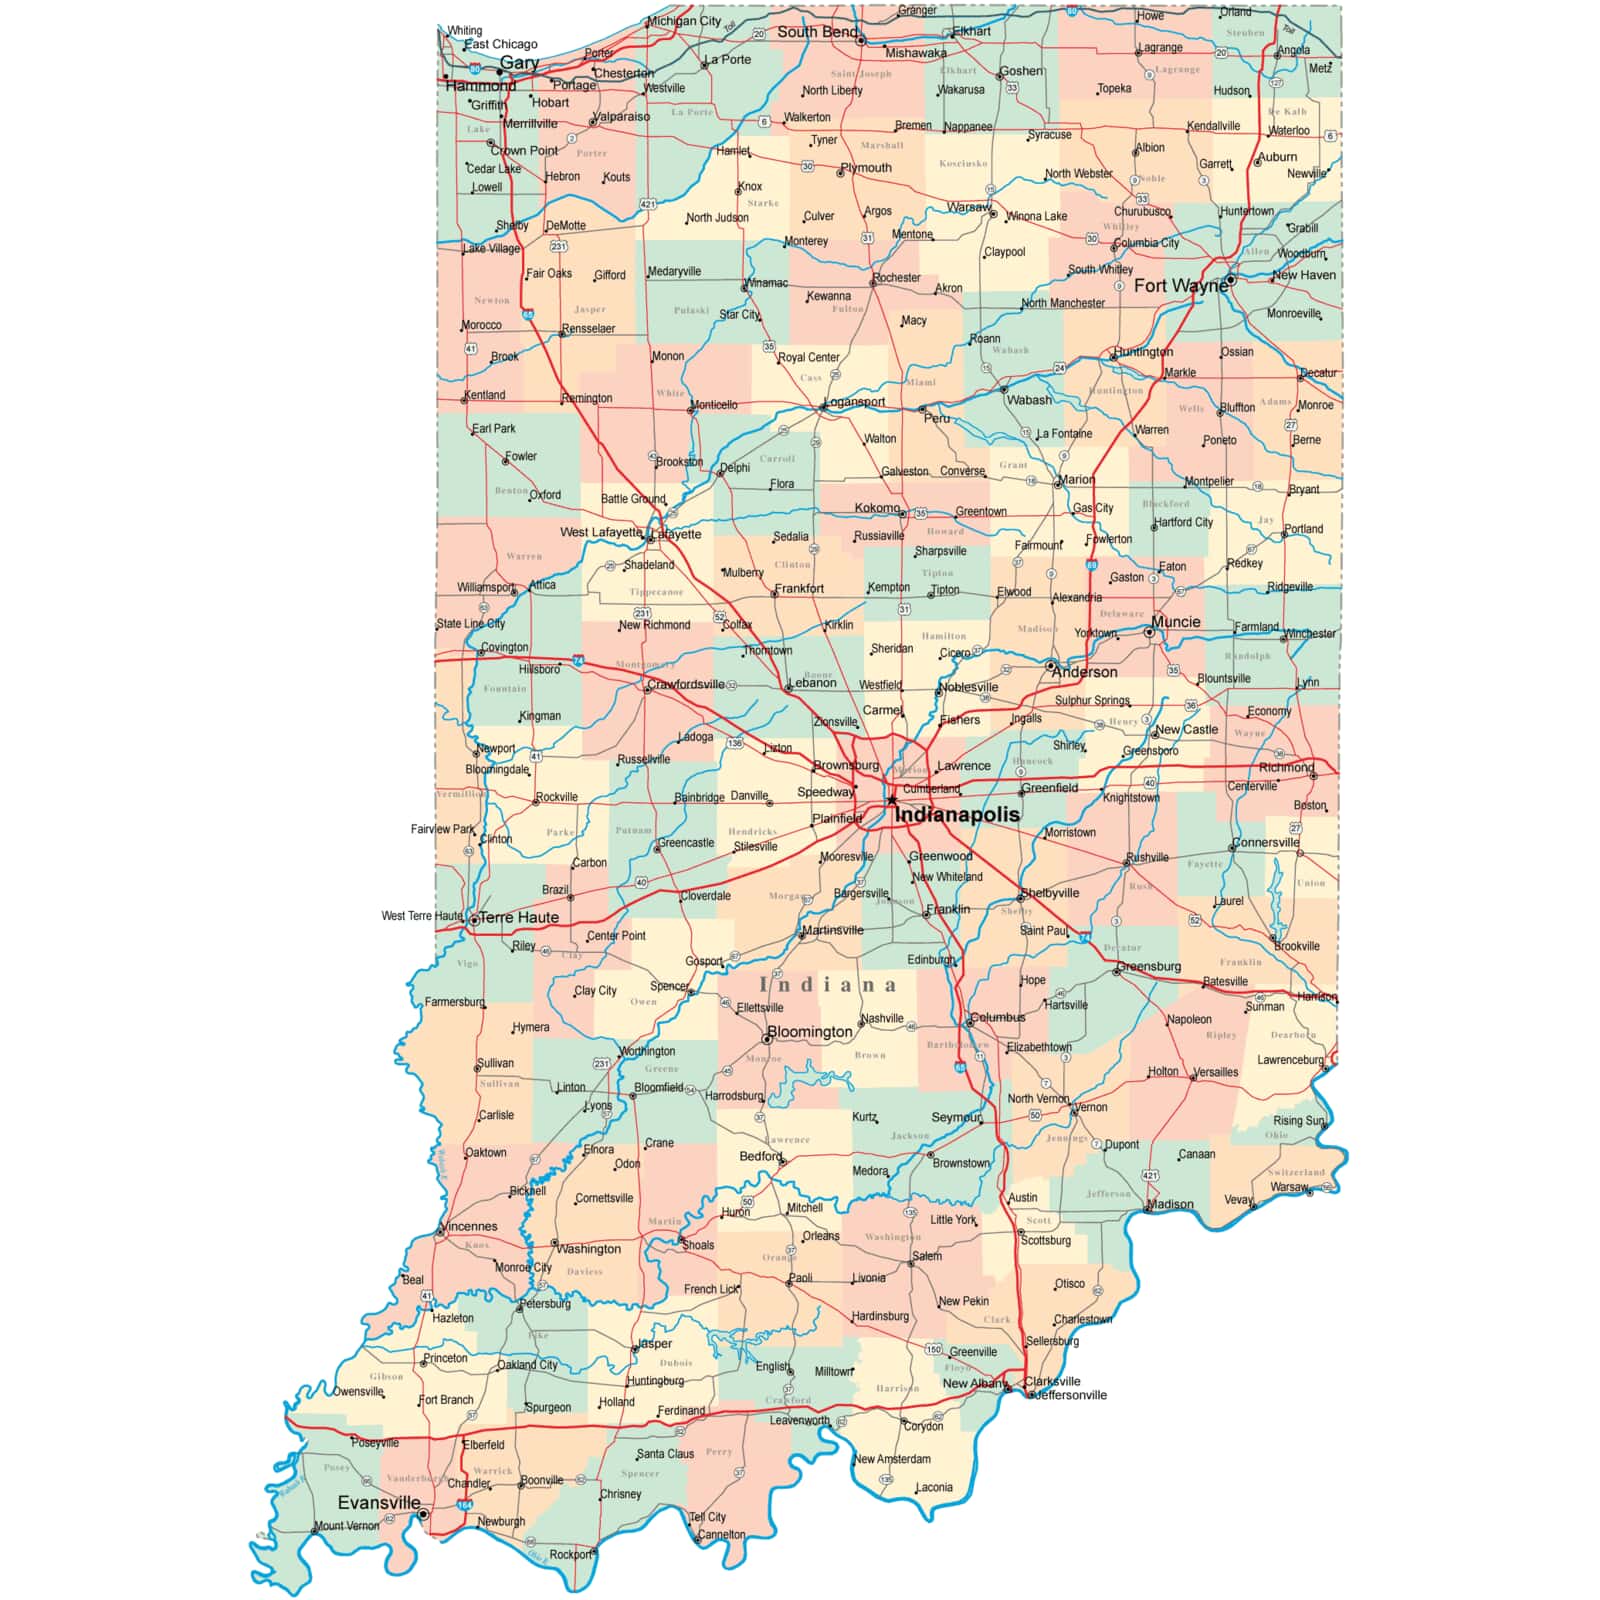 Indiana State Highway Map Indiana Road Map - In Road Map - Indiana Highway Map